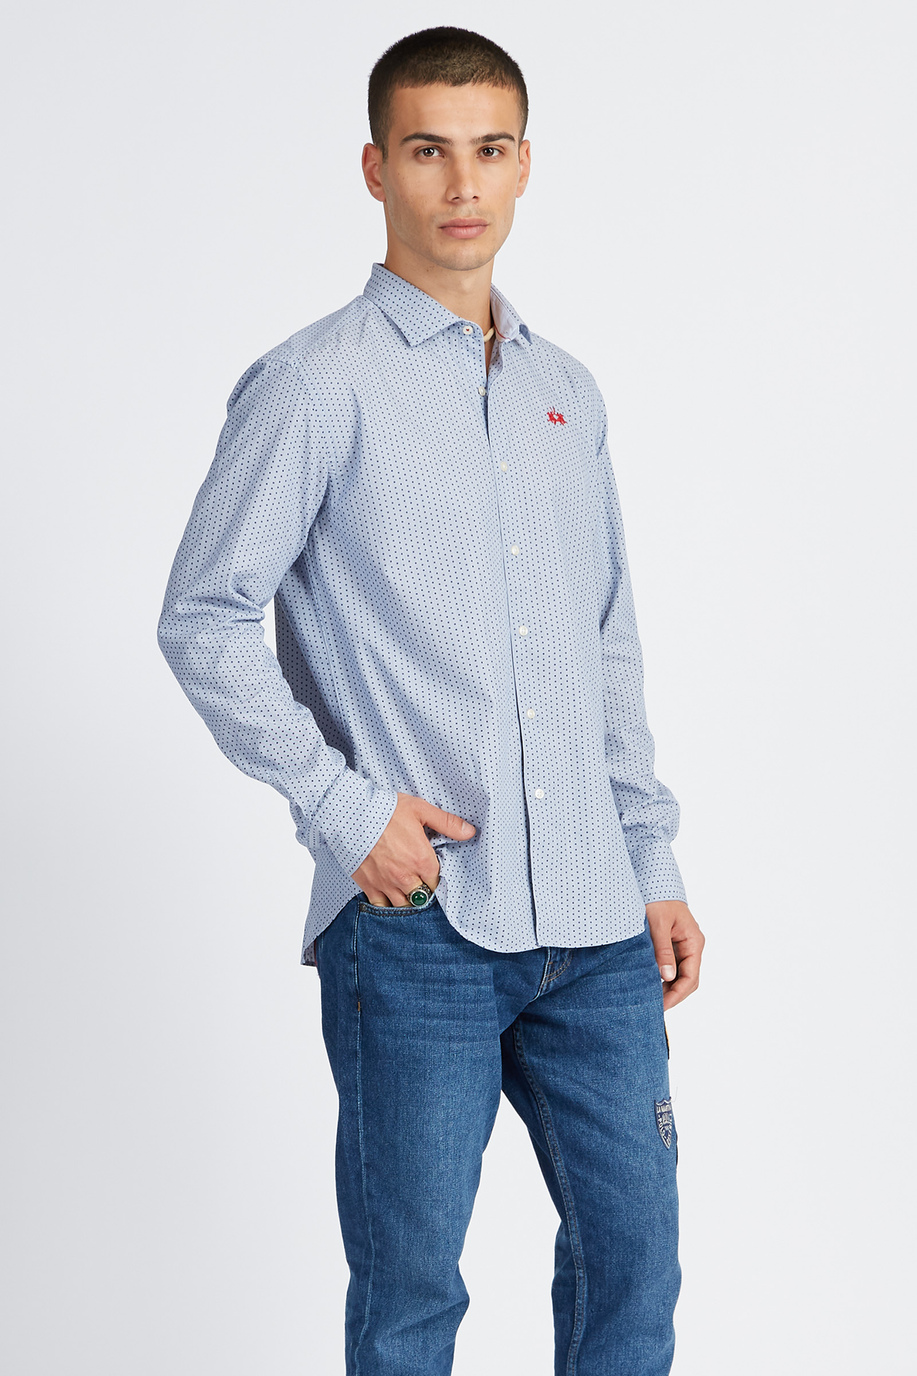 Polo Academy men's capsule long-sleeved shirt with polka dot pattern and small logo - Vachel - Shirts | La Martina - Official Online Shop